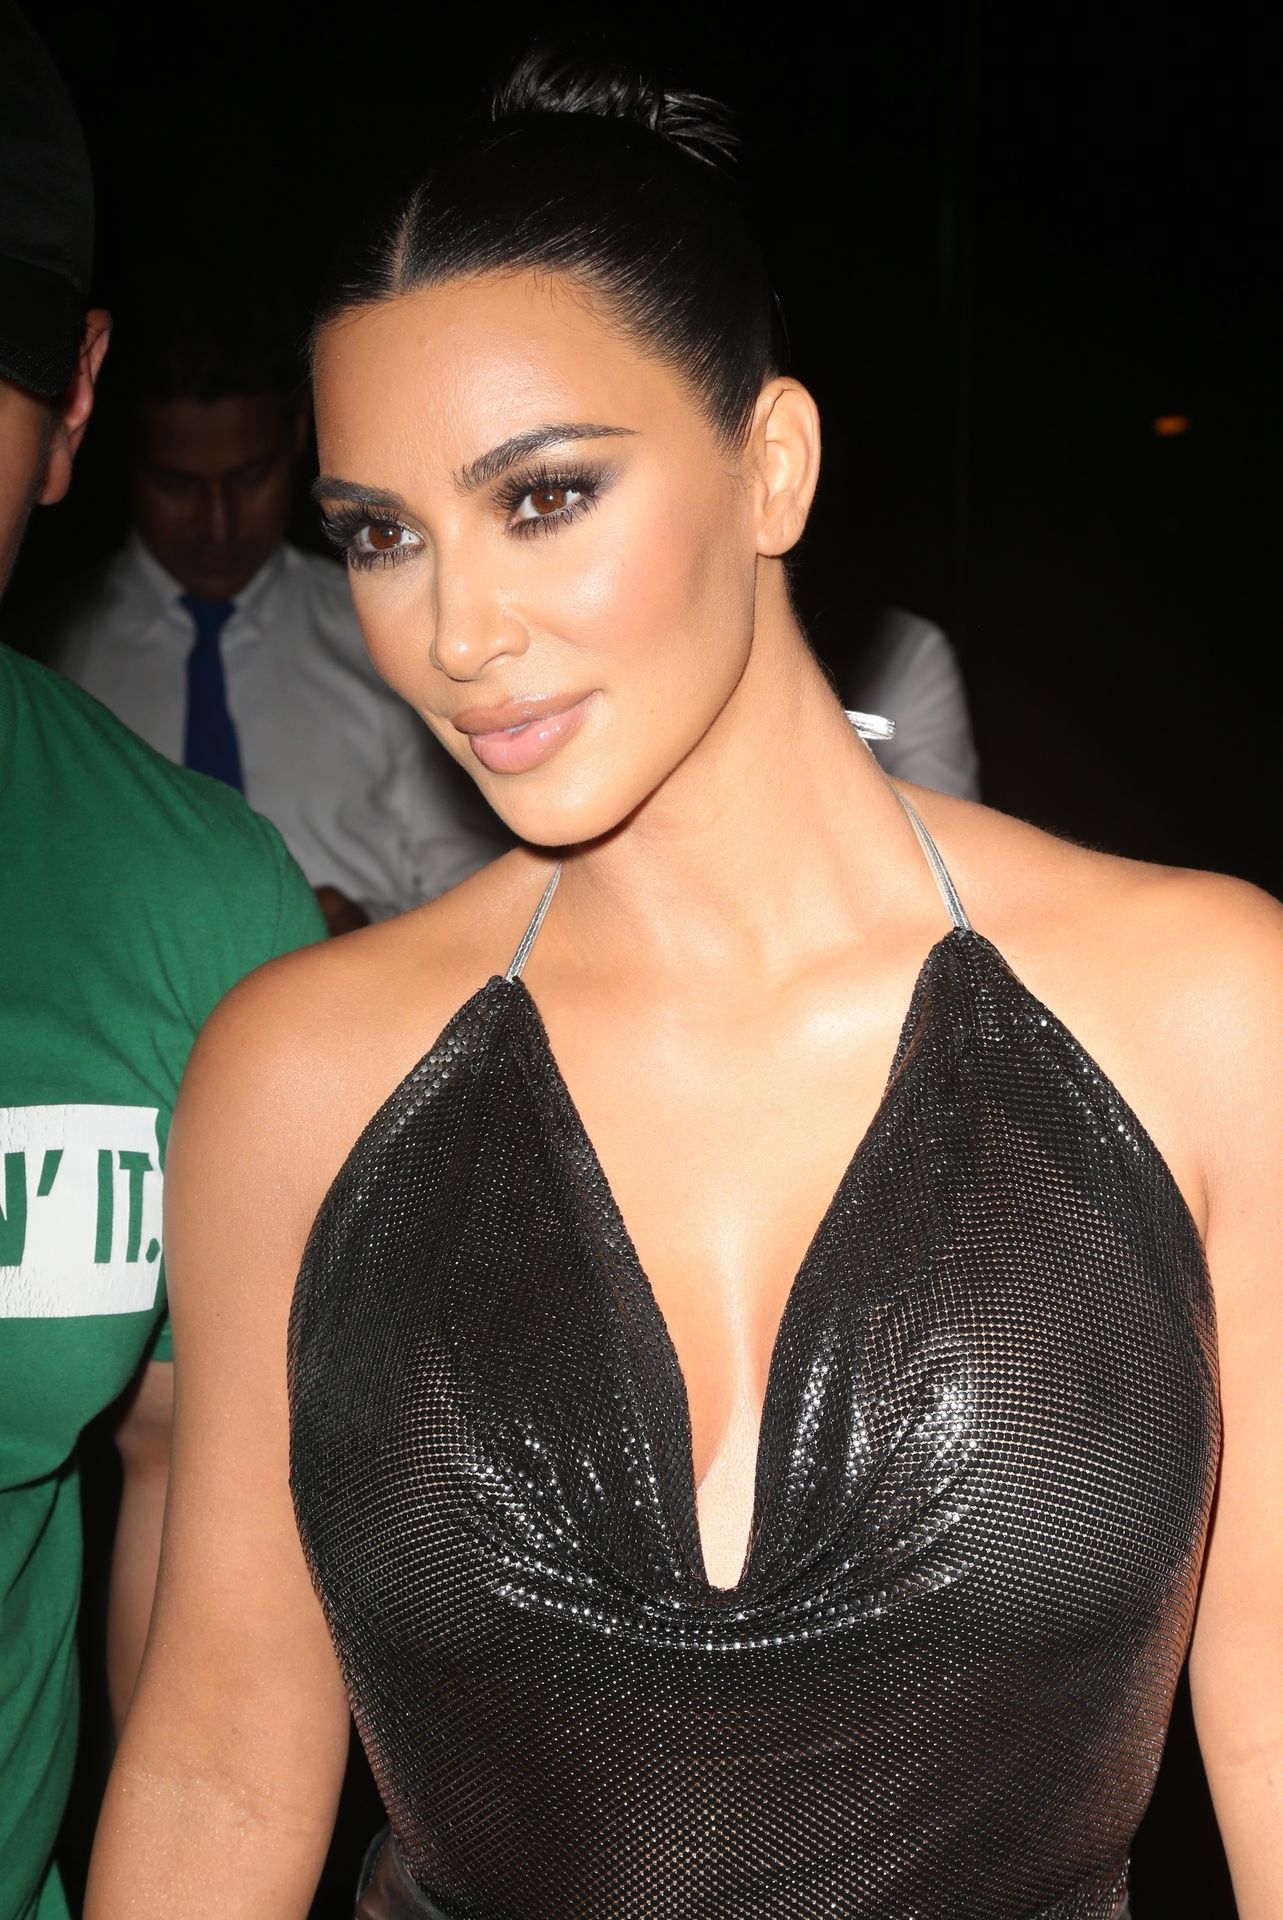 Buxom Brunette Kim Kardashian Showing Her Tits in a See-Through Outfit